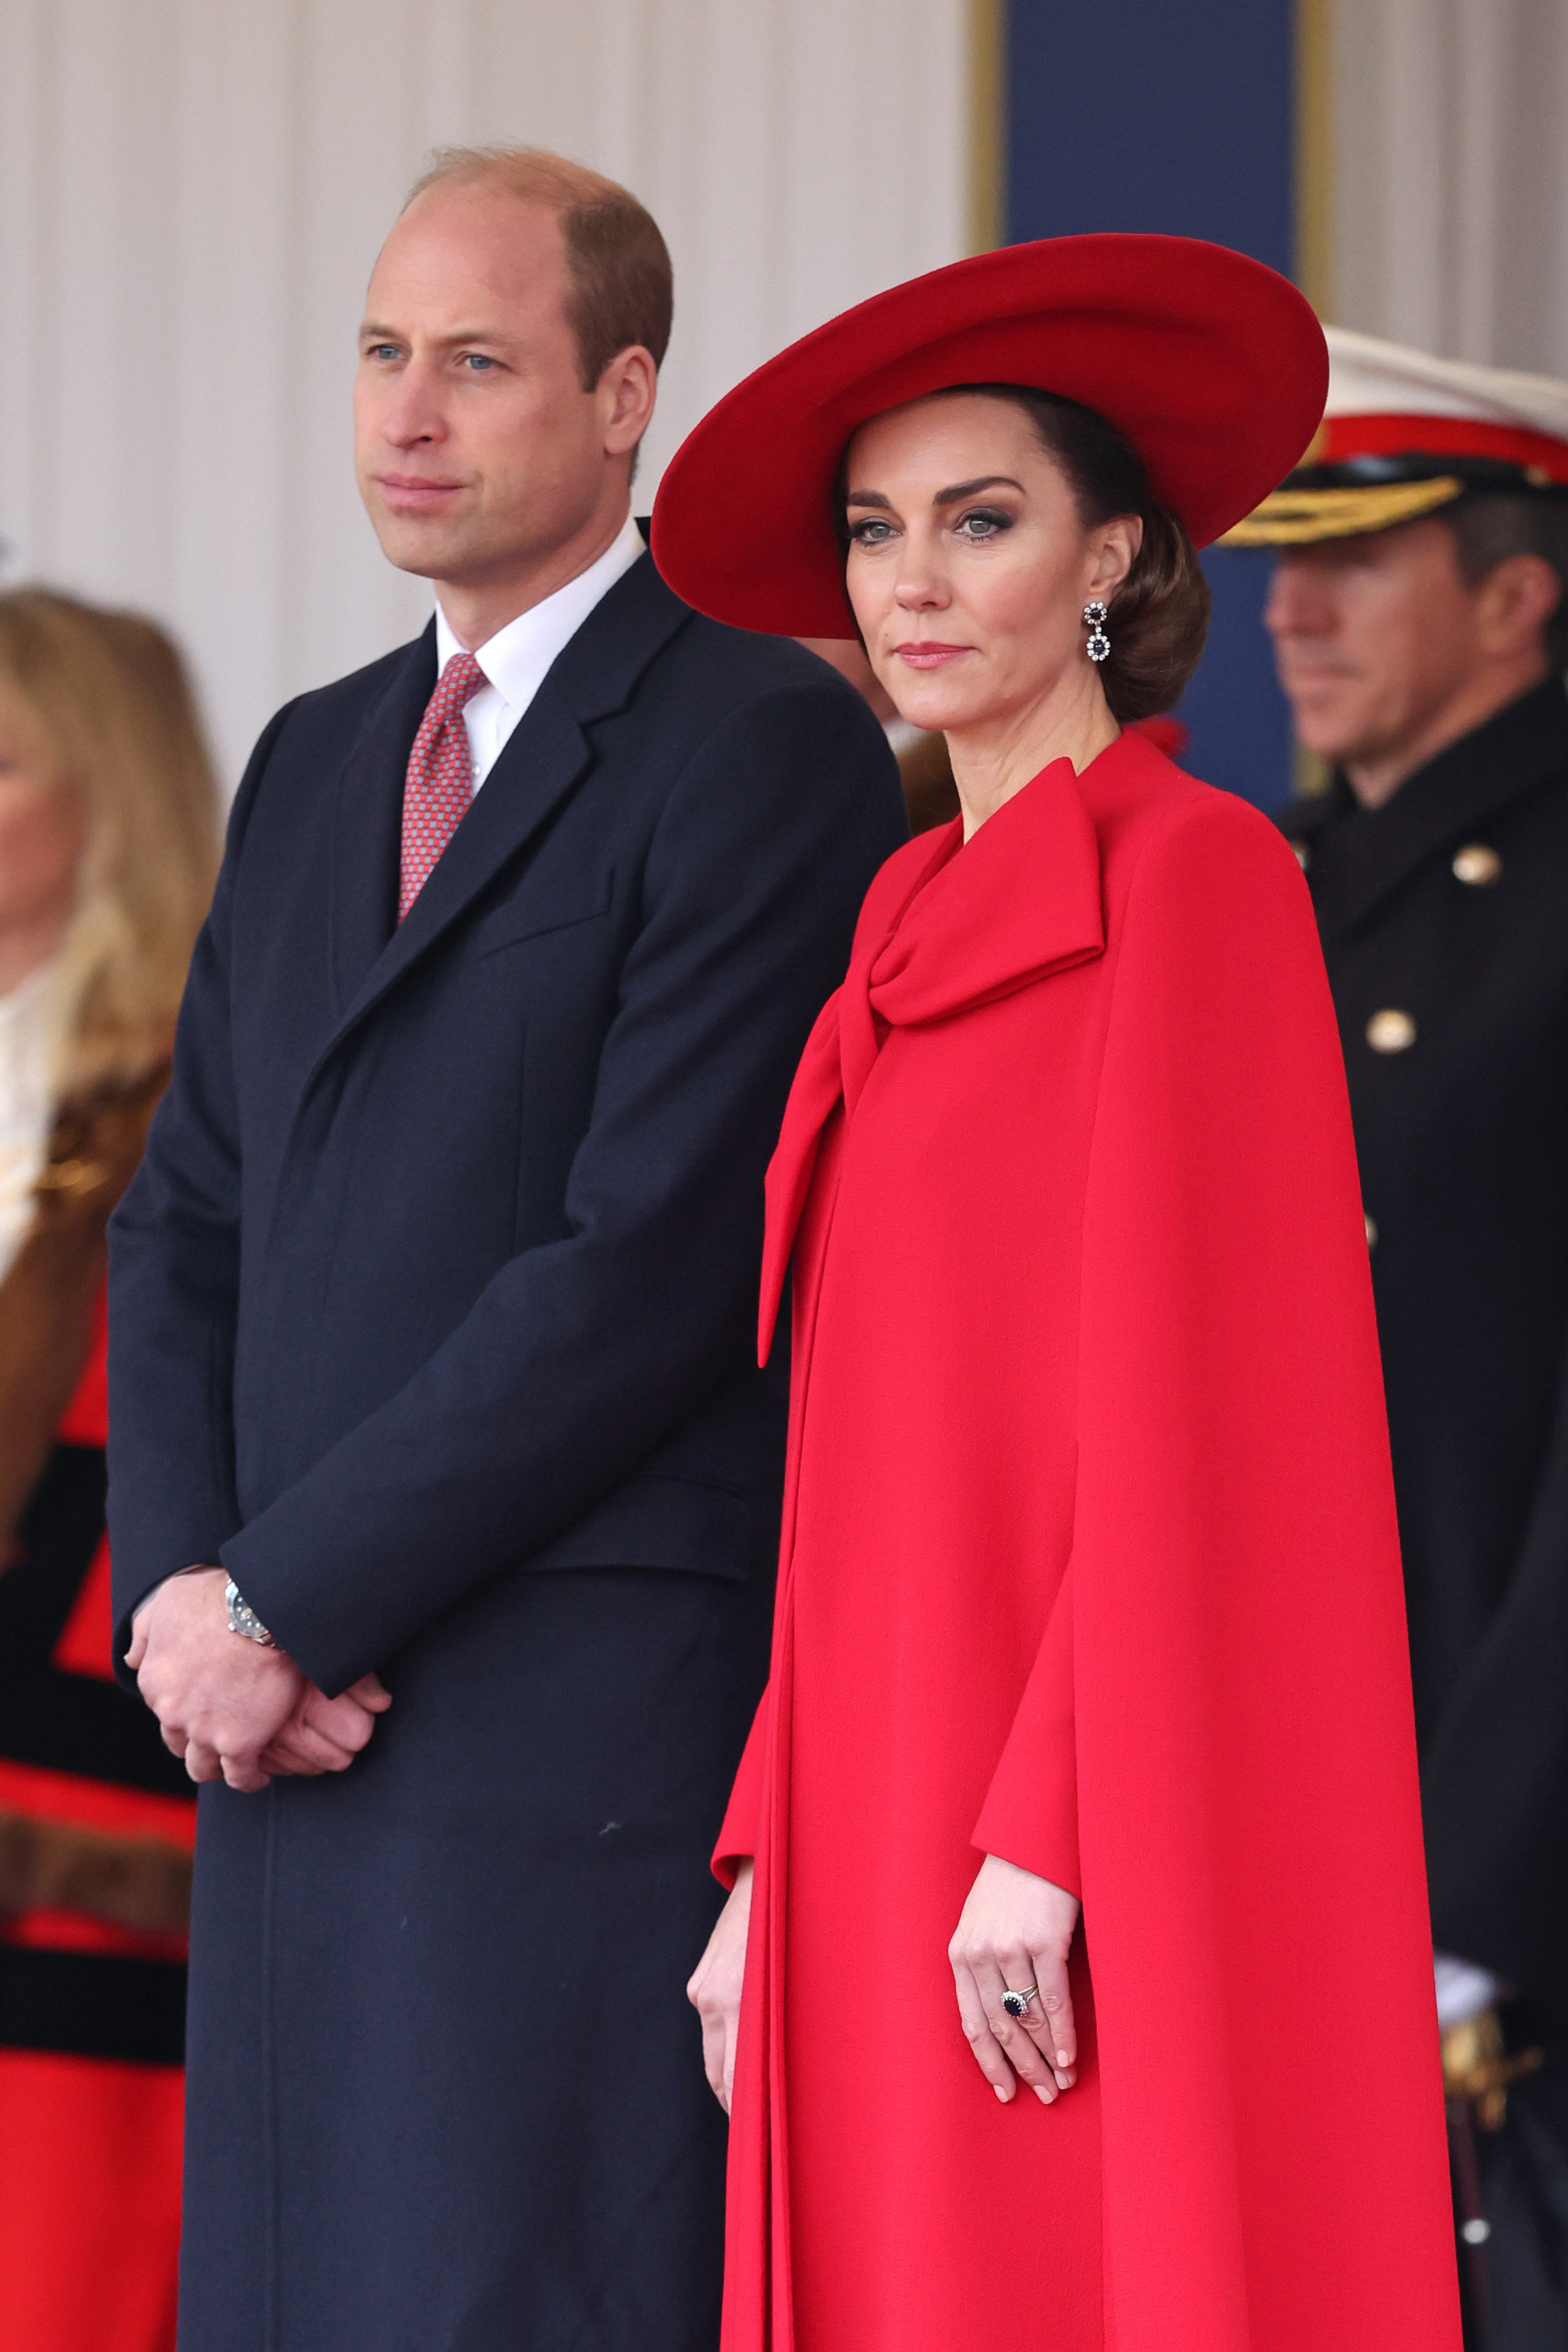 Prince William and Princess Kate attend a ceremonial welcome for The President and the First Lady of the Republic of Korea at Horse Guards Parade on November 21, 2023, in London, England | Source: Getty Images